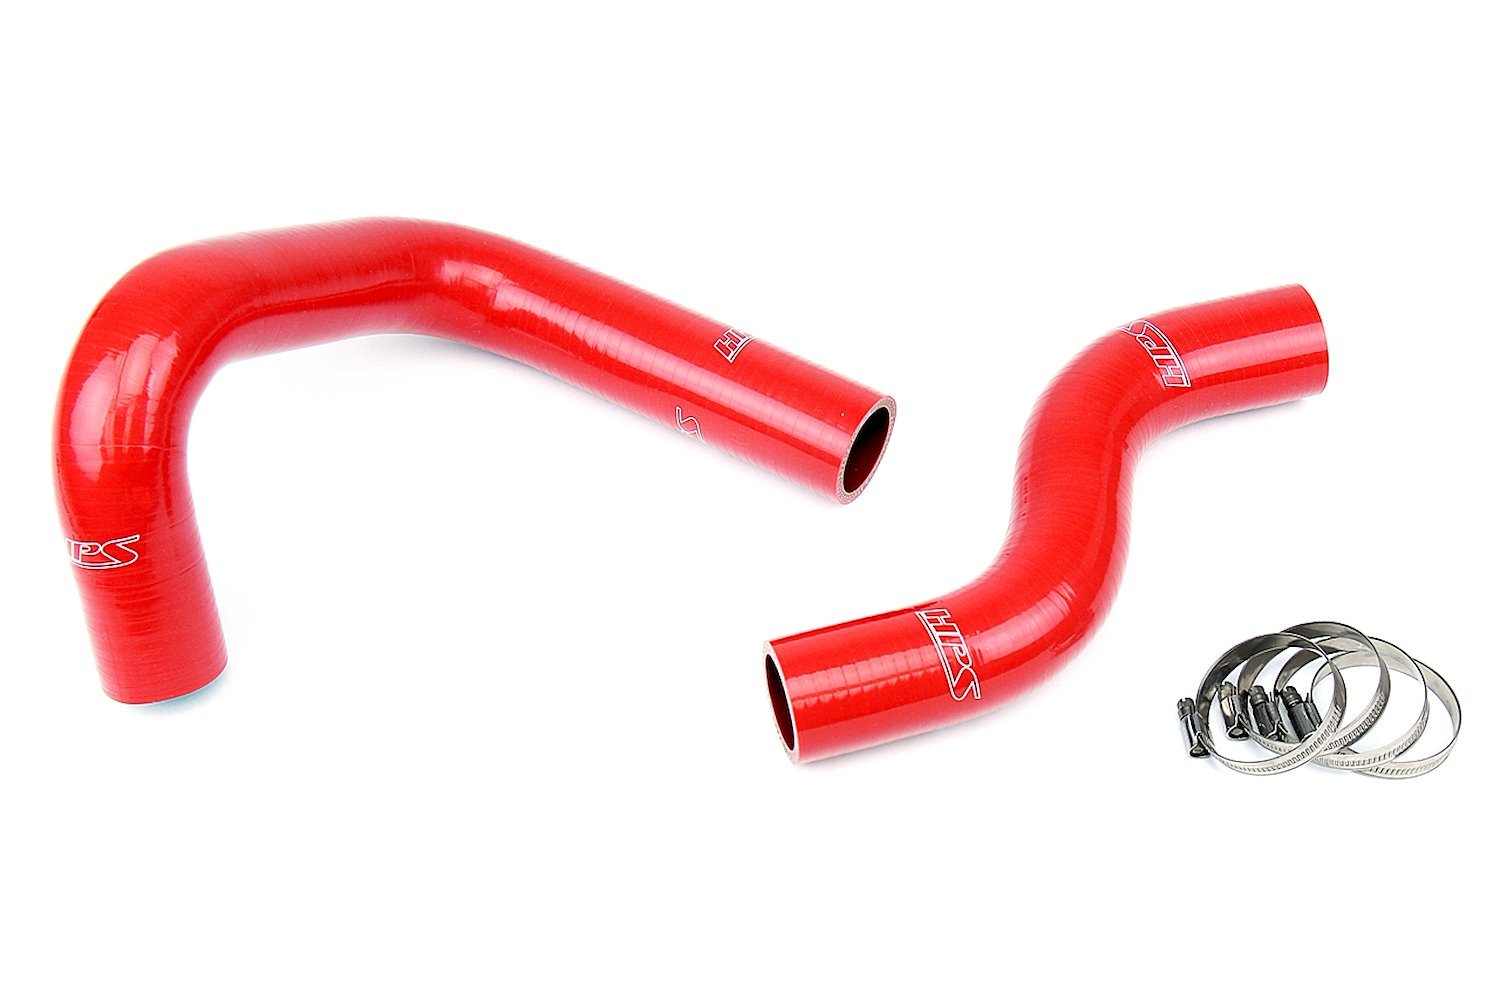 57-1450-RED Radiator Hose Kit, High-Temp 3-Ply Reinforced Silicone, Replace OEM Rubber Radiator Coolant Hoses